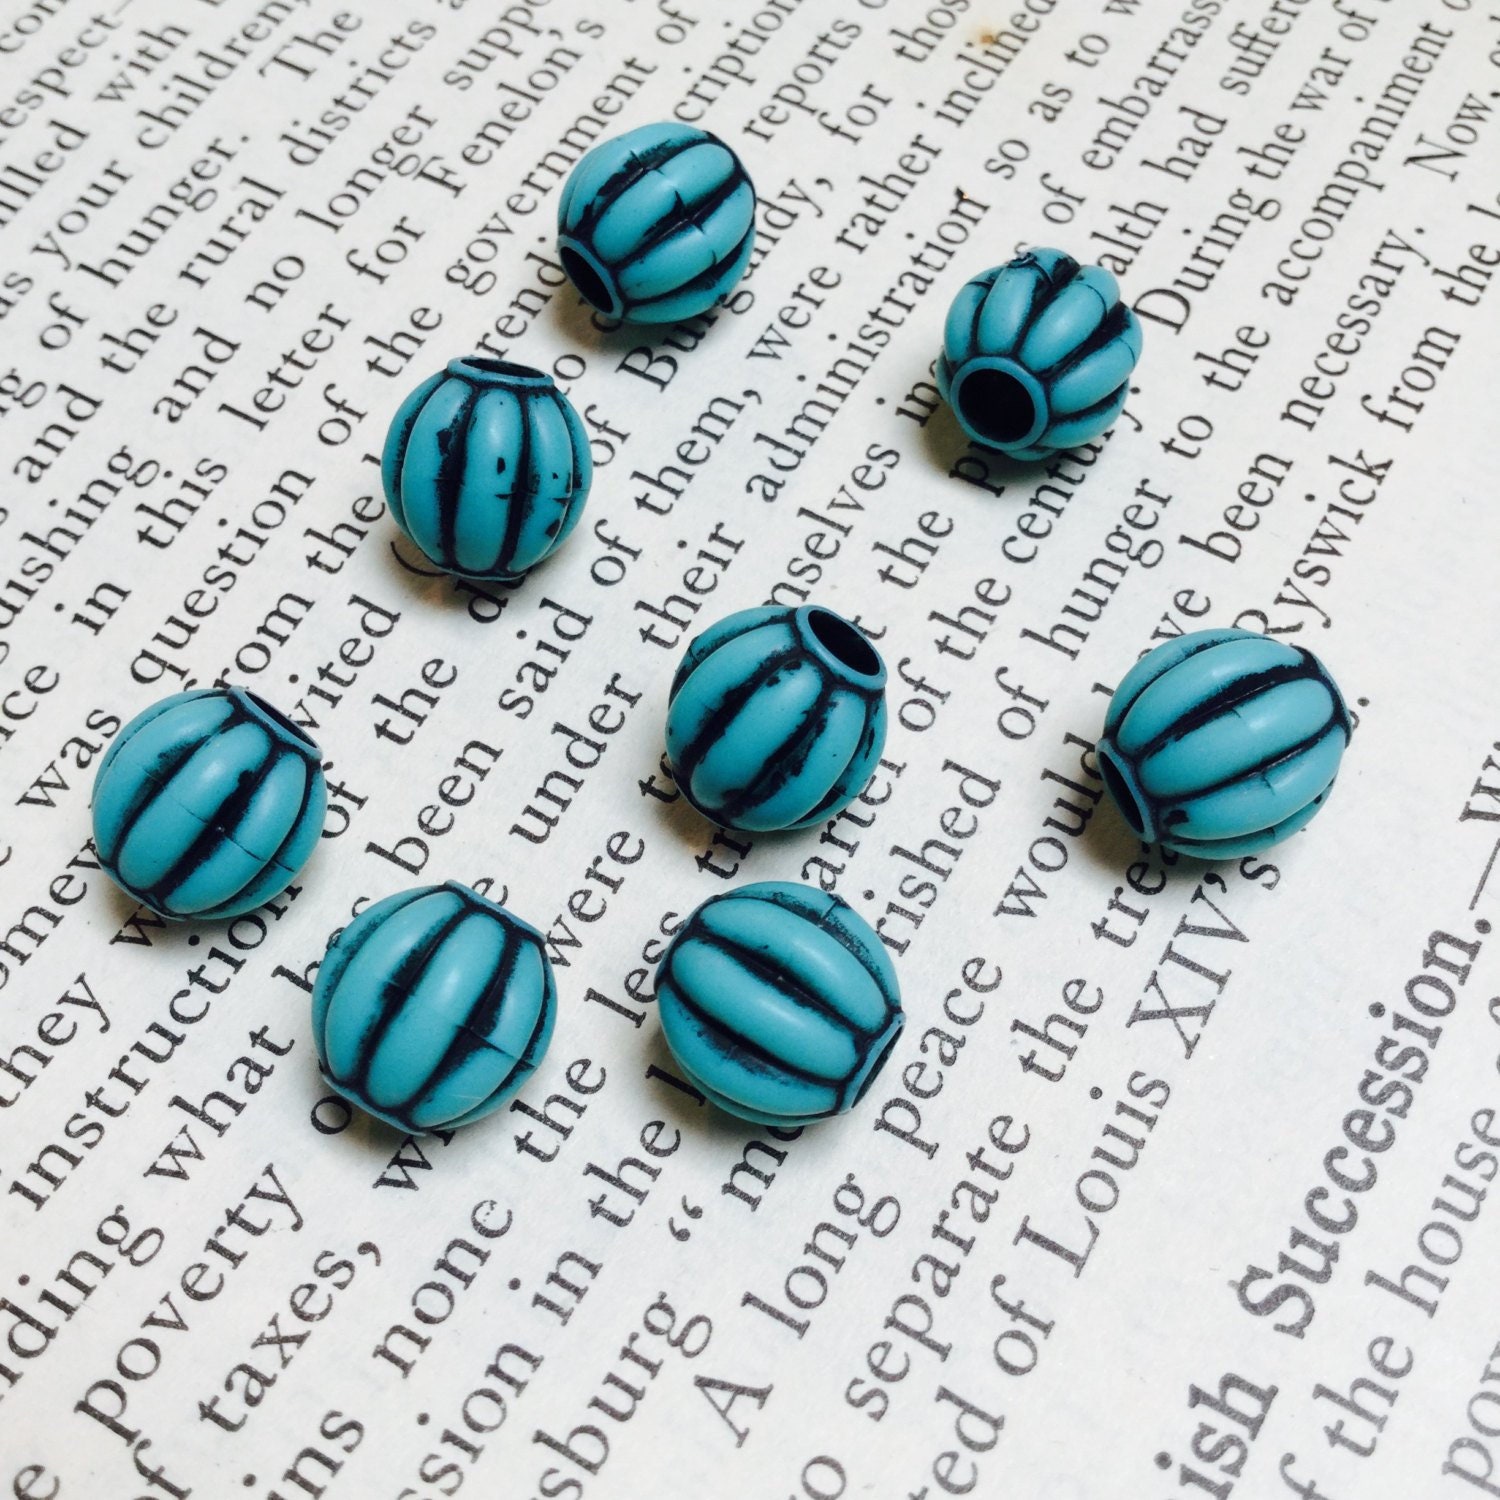 Corrugated Acrylic Rounds in Turquoise (large hole) – 40 Pieces